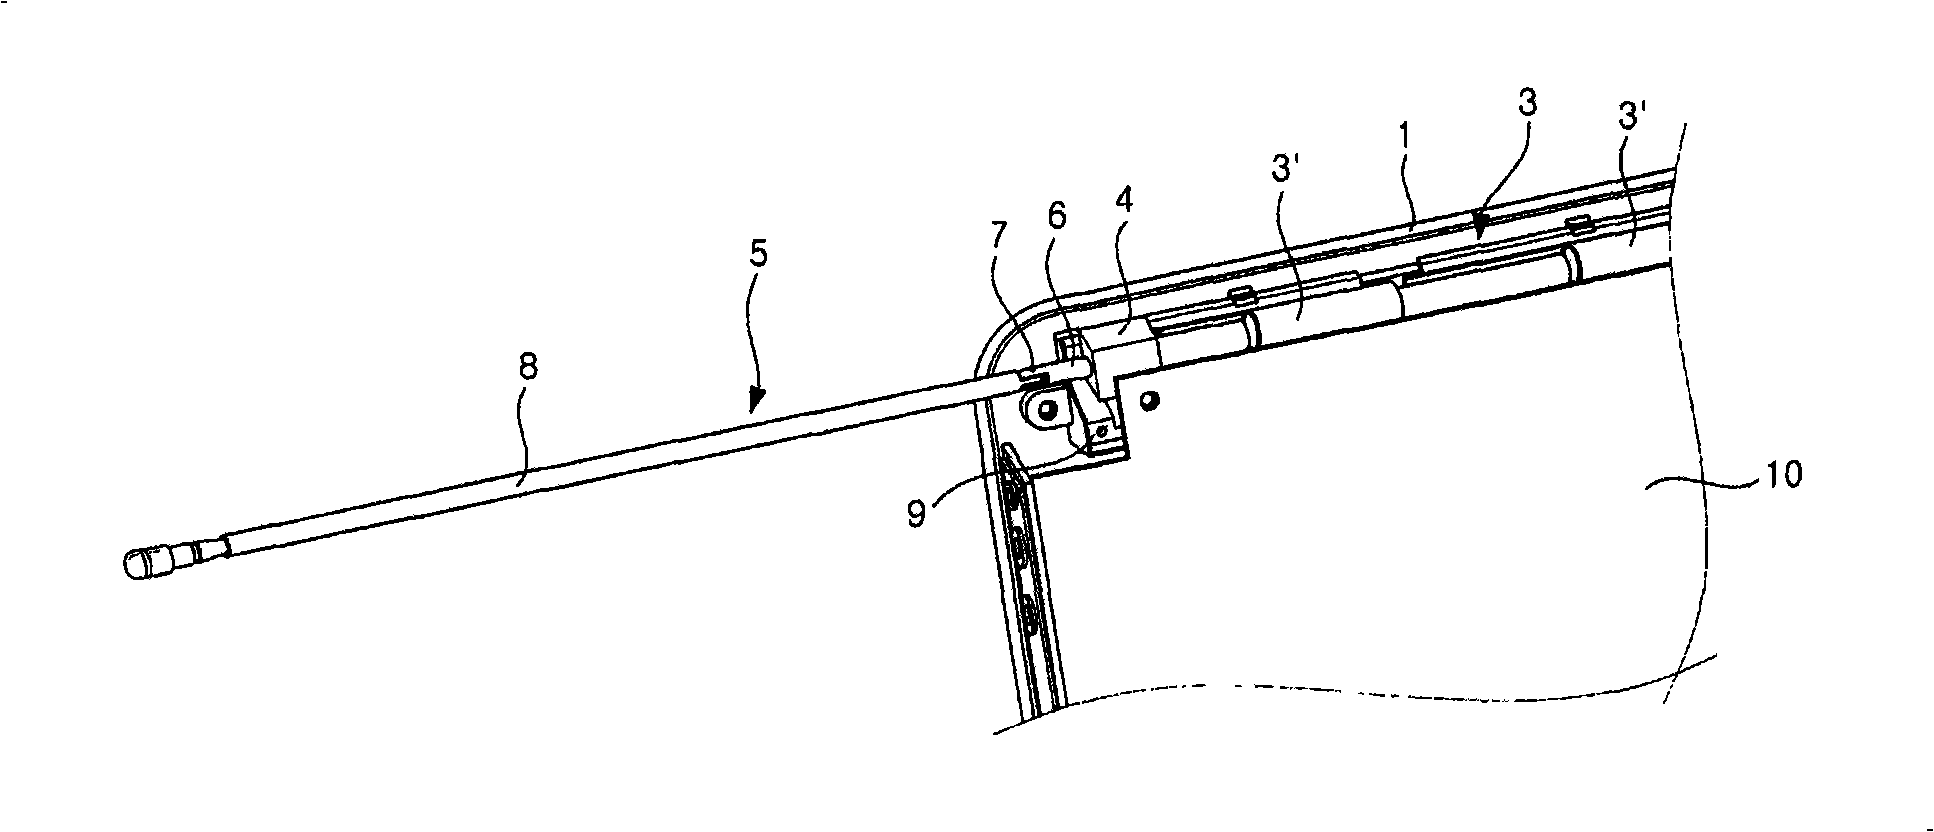 Antenna mounting structure